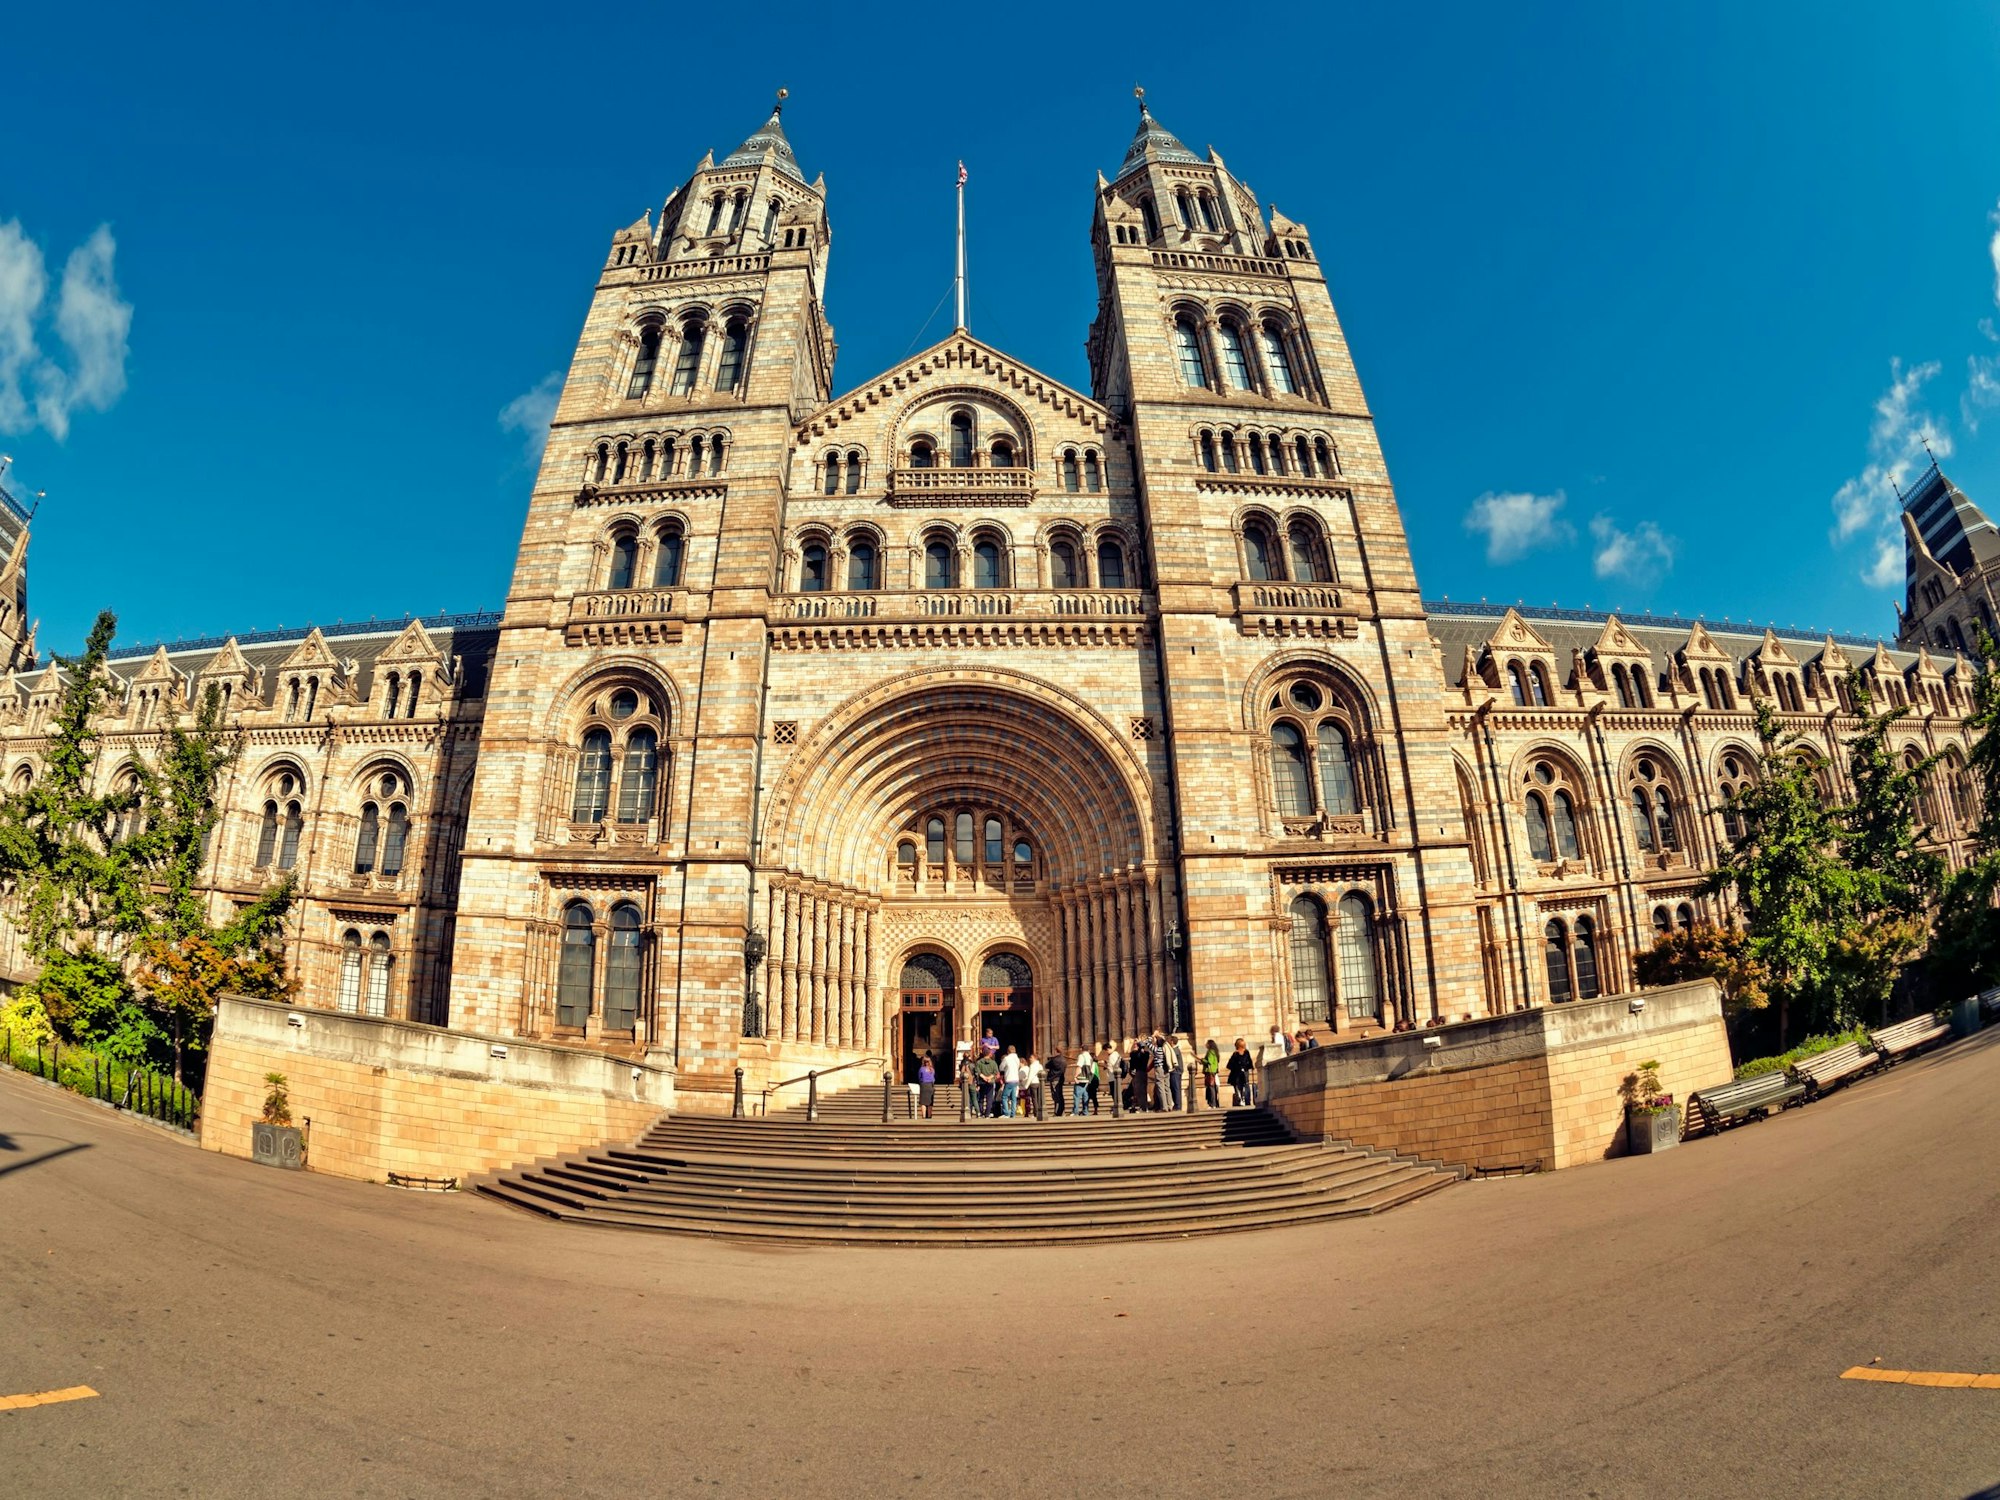 Entrance of the Natural History Museum, London, UK.